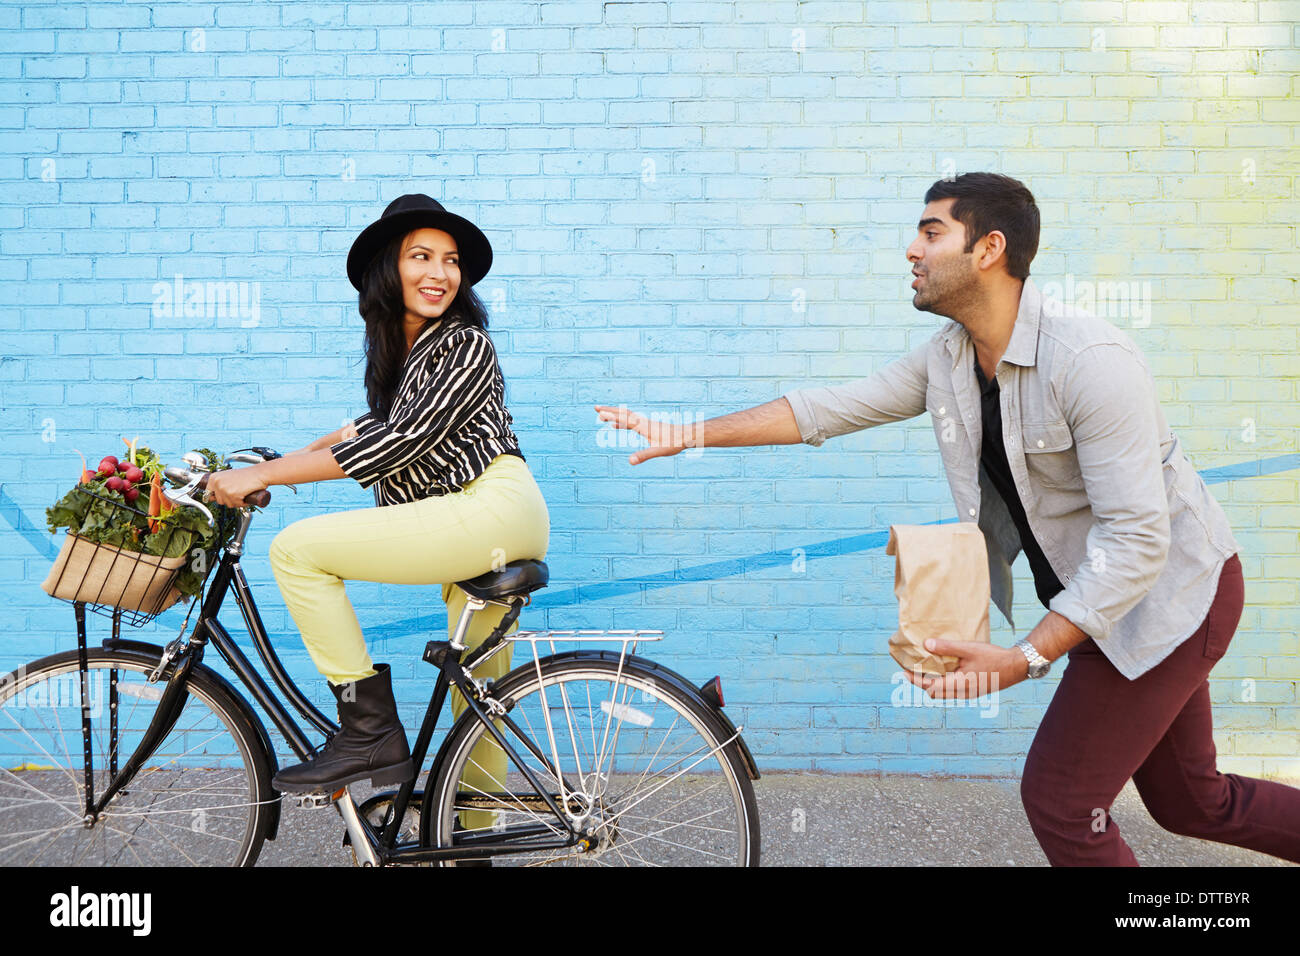 Indian man chasing girlfriend on bicycle Stock Photo